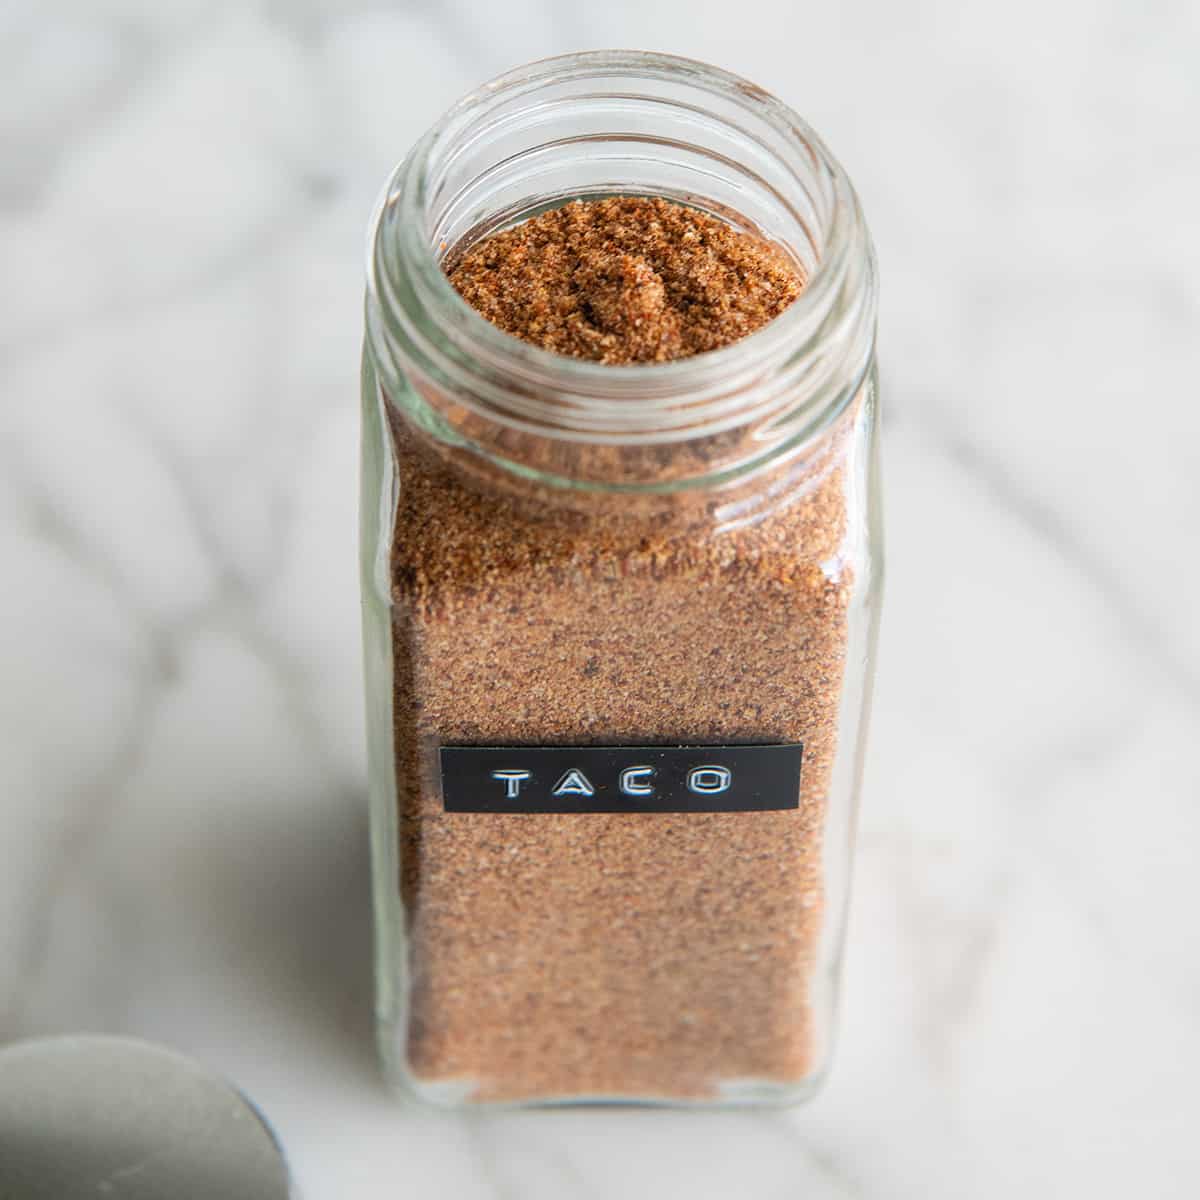 a glass jar with a black label that reads "taco" full of Homemade Taco Seasoning